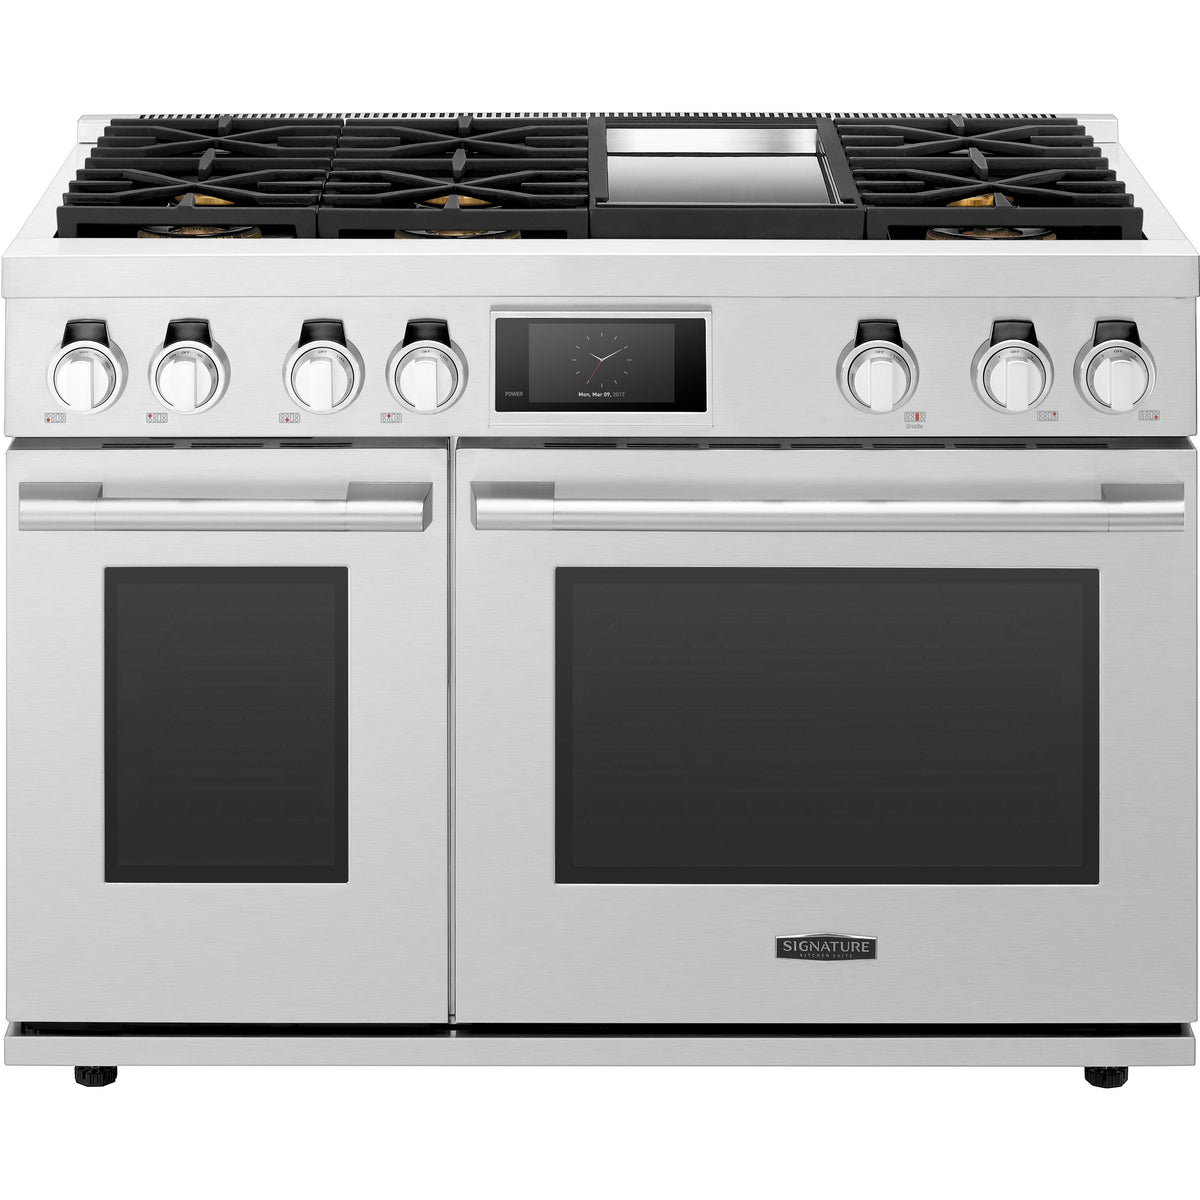 48-inch Freestanding Dual-Fuel Range with Wi-Fi Connectivity SKSDR480GS IMAGE 1